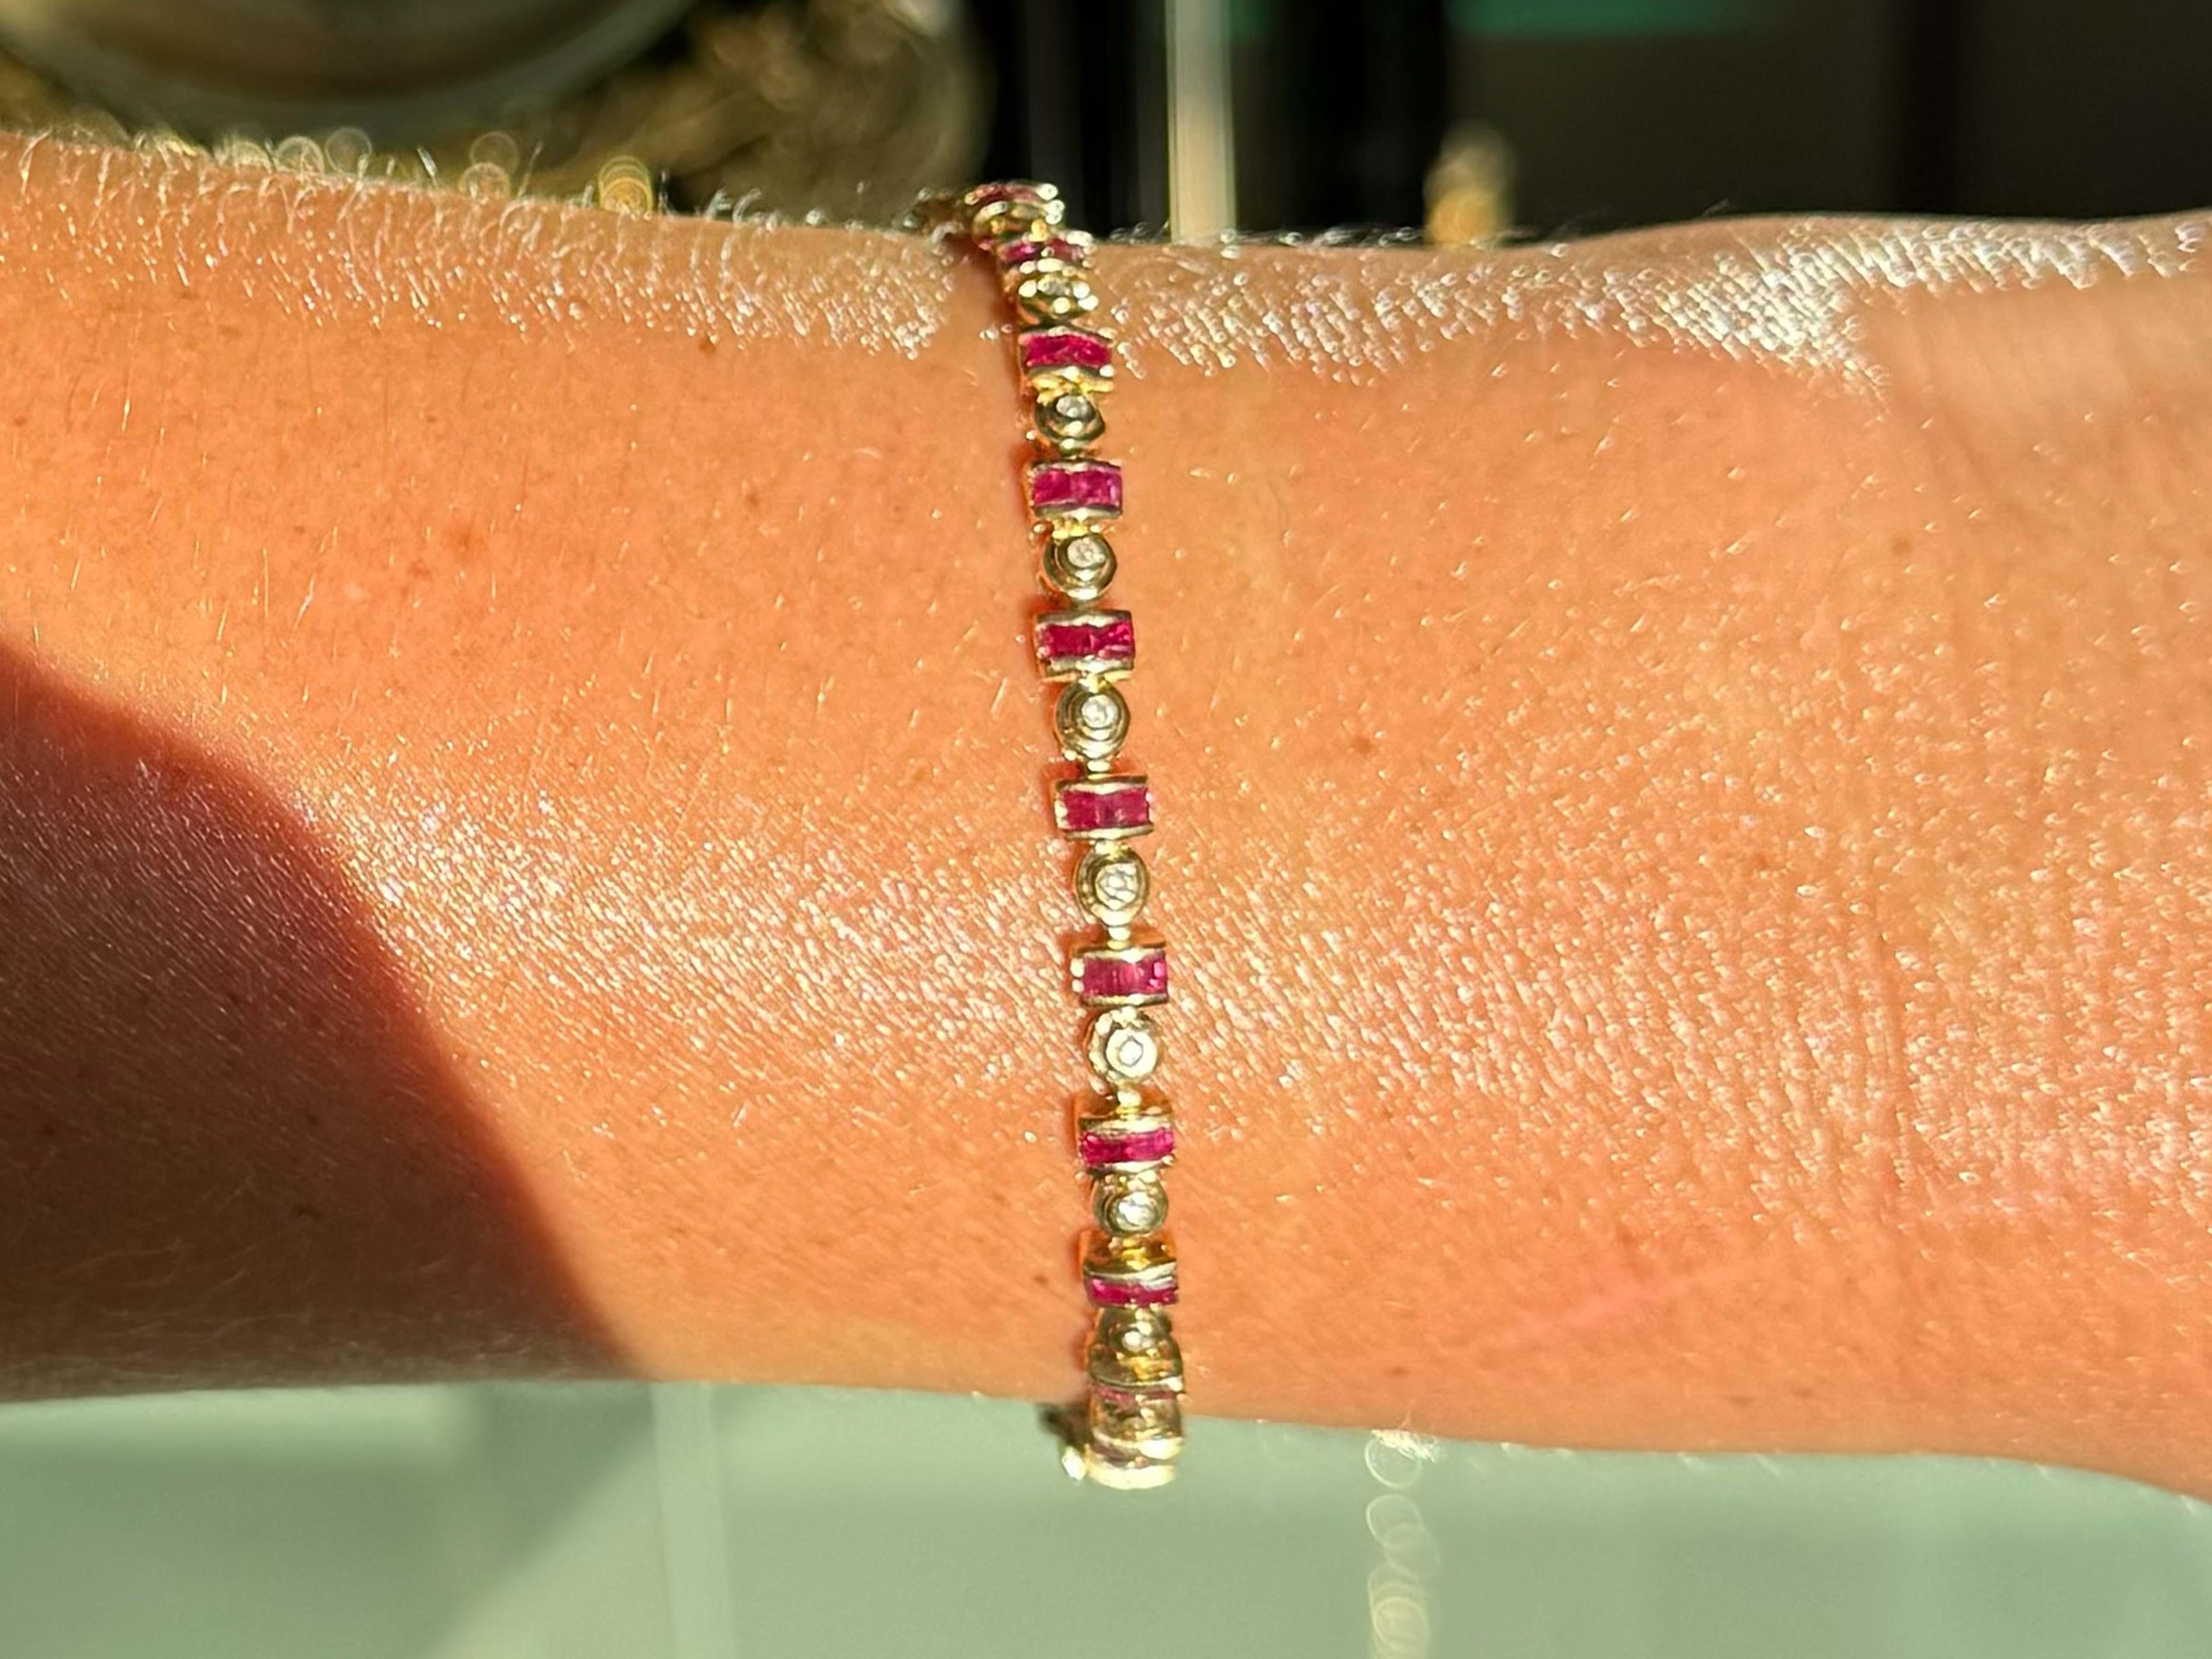 Bracelet Specifications:

Metal: 14k Yellow Gold

Ruby Count: 48 square cut rubies

Ruby Carat Weight: ~2.40 carats

Diamond Carat Weight: ~ 0.25 carats

Diamond Count: 25 brilliant 

Diamond Color: H-I

Diamond Clarity: SI2-I1

Bracelet Length: